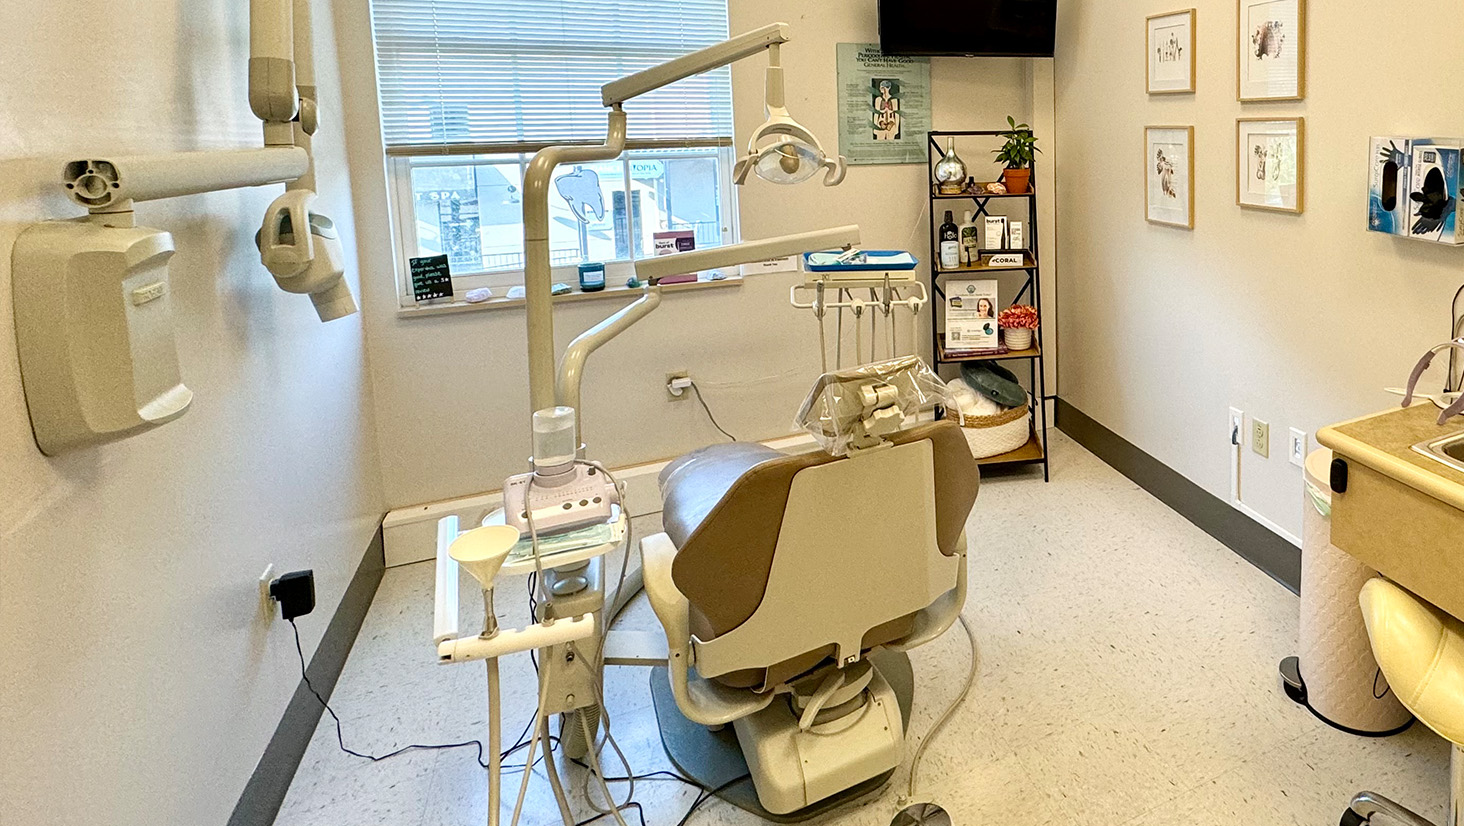 The image shows a dental office interior with various pieces of equipment and furniture, including dental chairs, a counter with multiple sinks, a reception area with a desk and chair, and a large window.